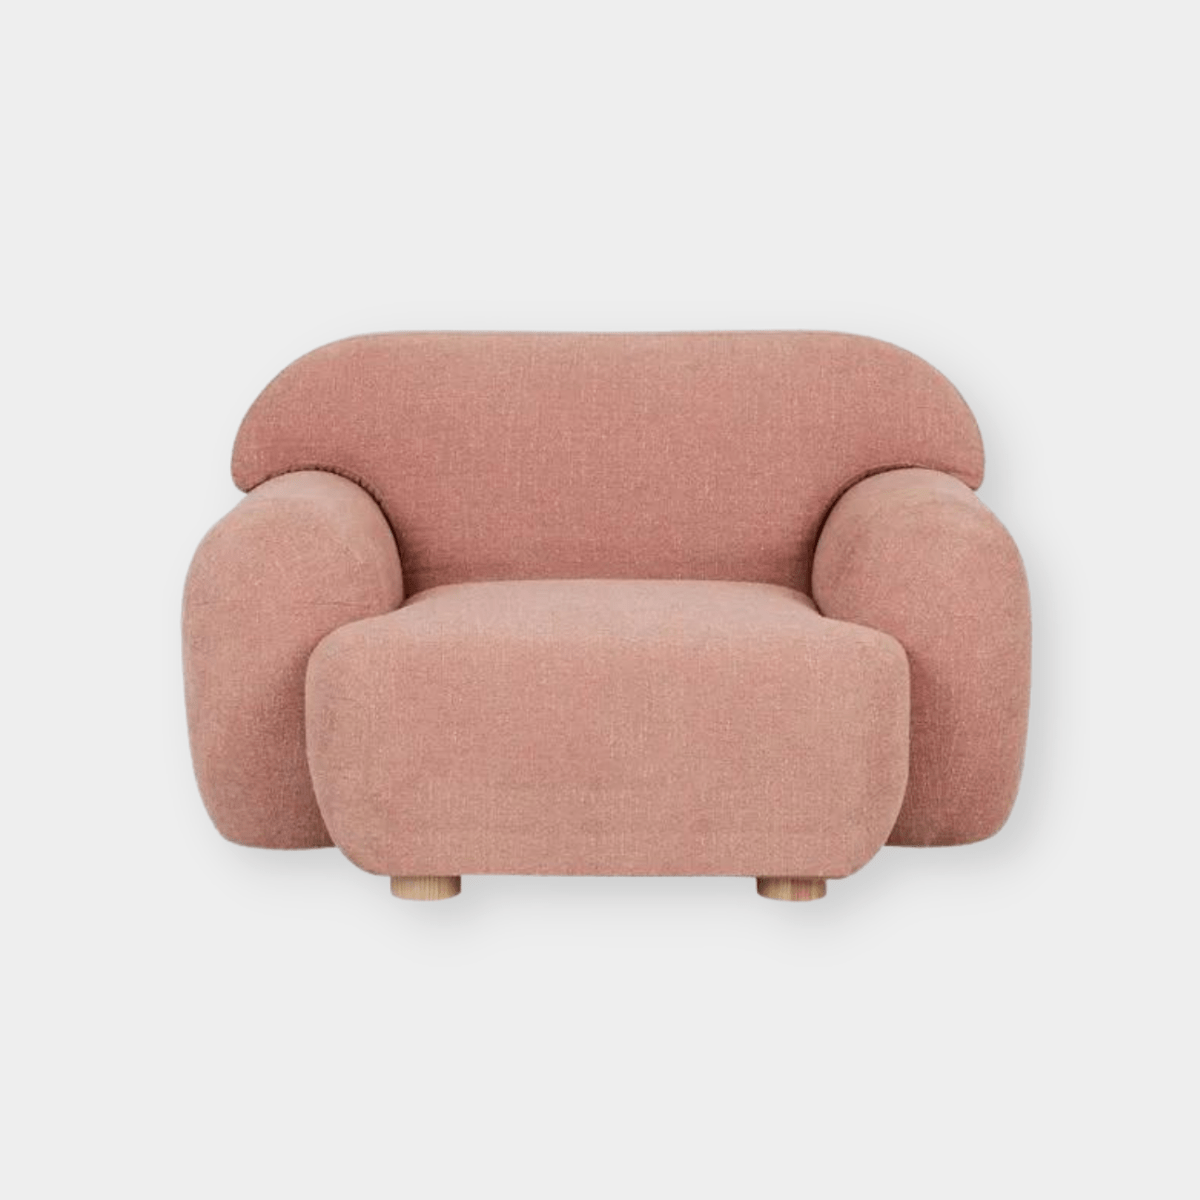 Globe West Occasional Chairs Globe West Sidney Plump Sofa Chair, Blush Pink (7953845289209)